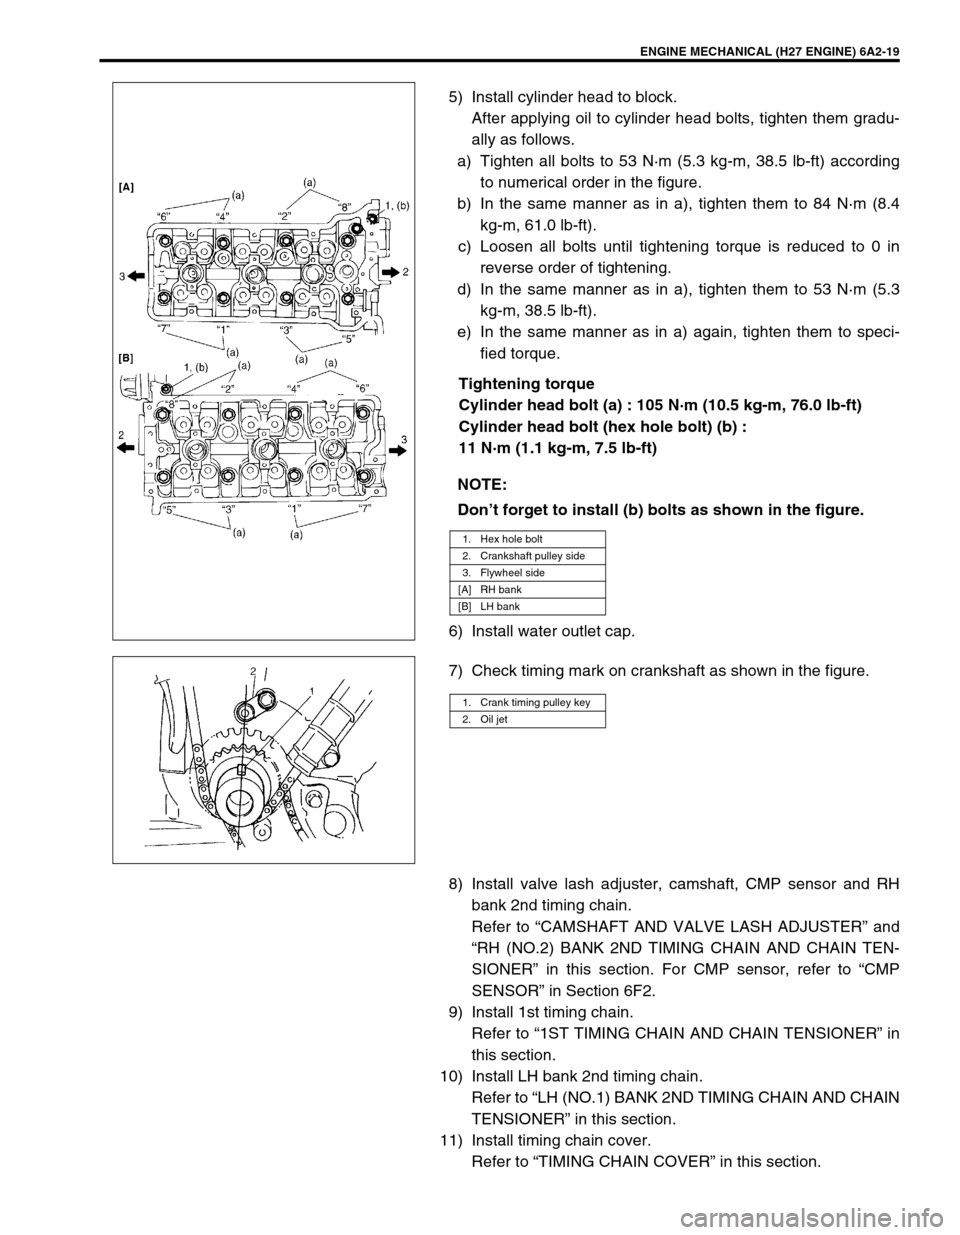 SUZUKI GRAND VITARA 1999 2.G Owners Manual ENGINE MECHANICAL (H27 ENGINE) 6A2-19
5) Install cylinder head to block.
After applying oil to cylinder head bolts, tighten them gradu-
ally as follows.
a) Tighten all bolts to 53 N·m (5.3 kg-m, 38.5